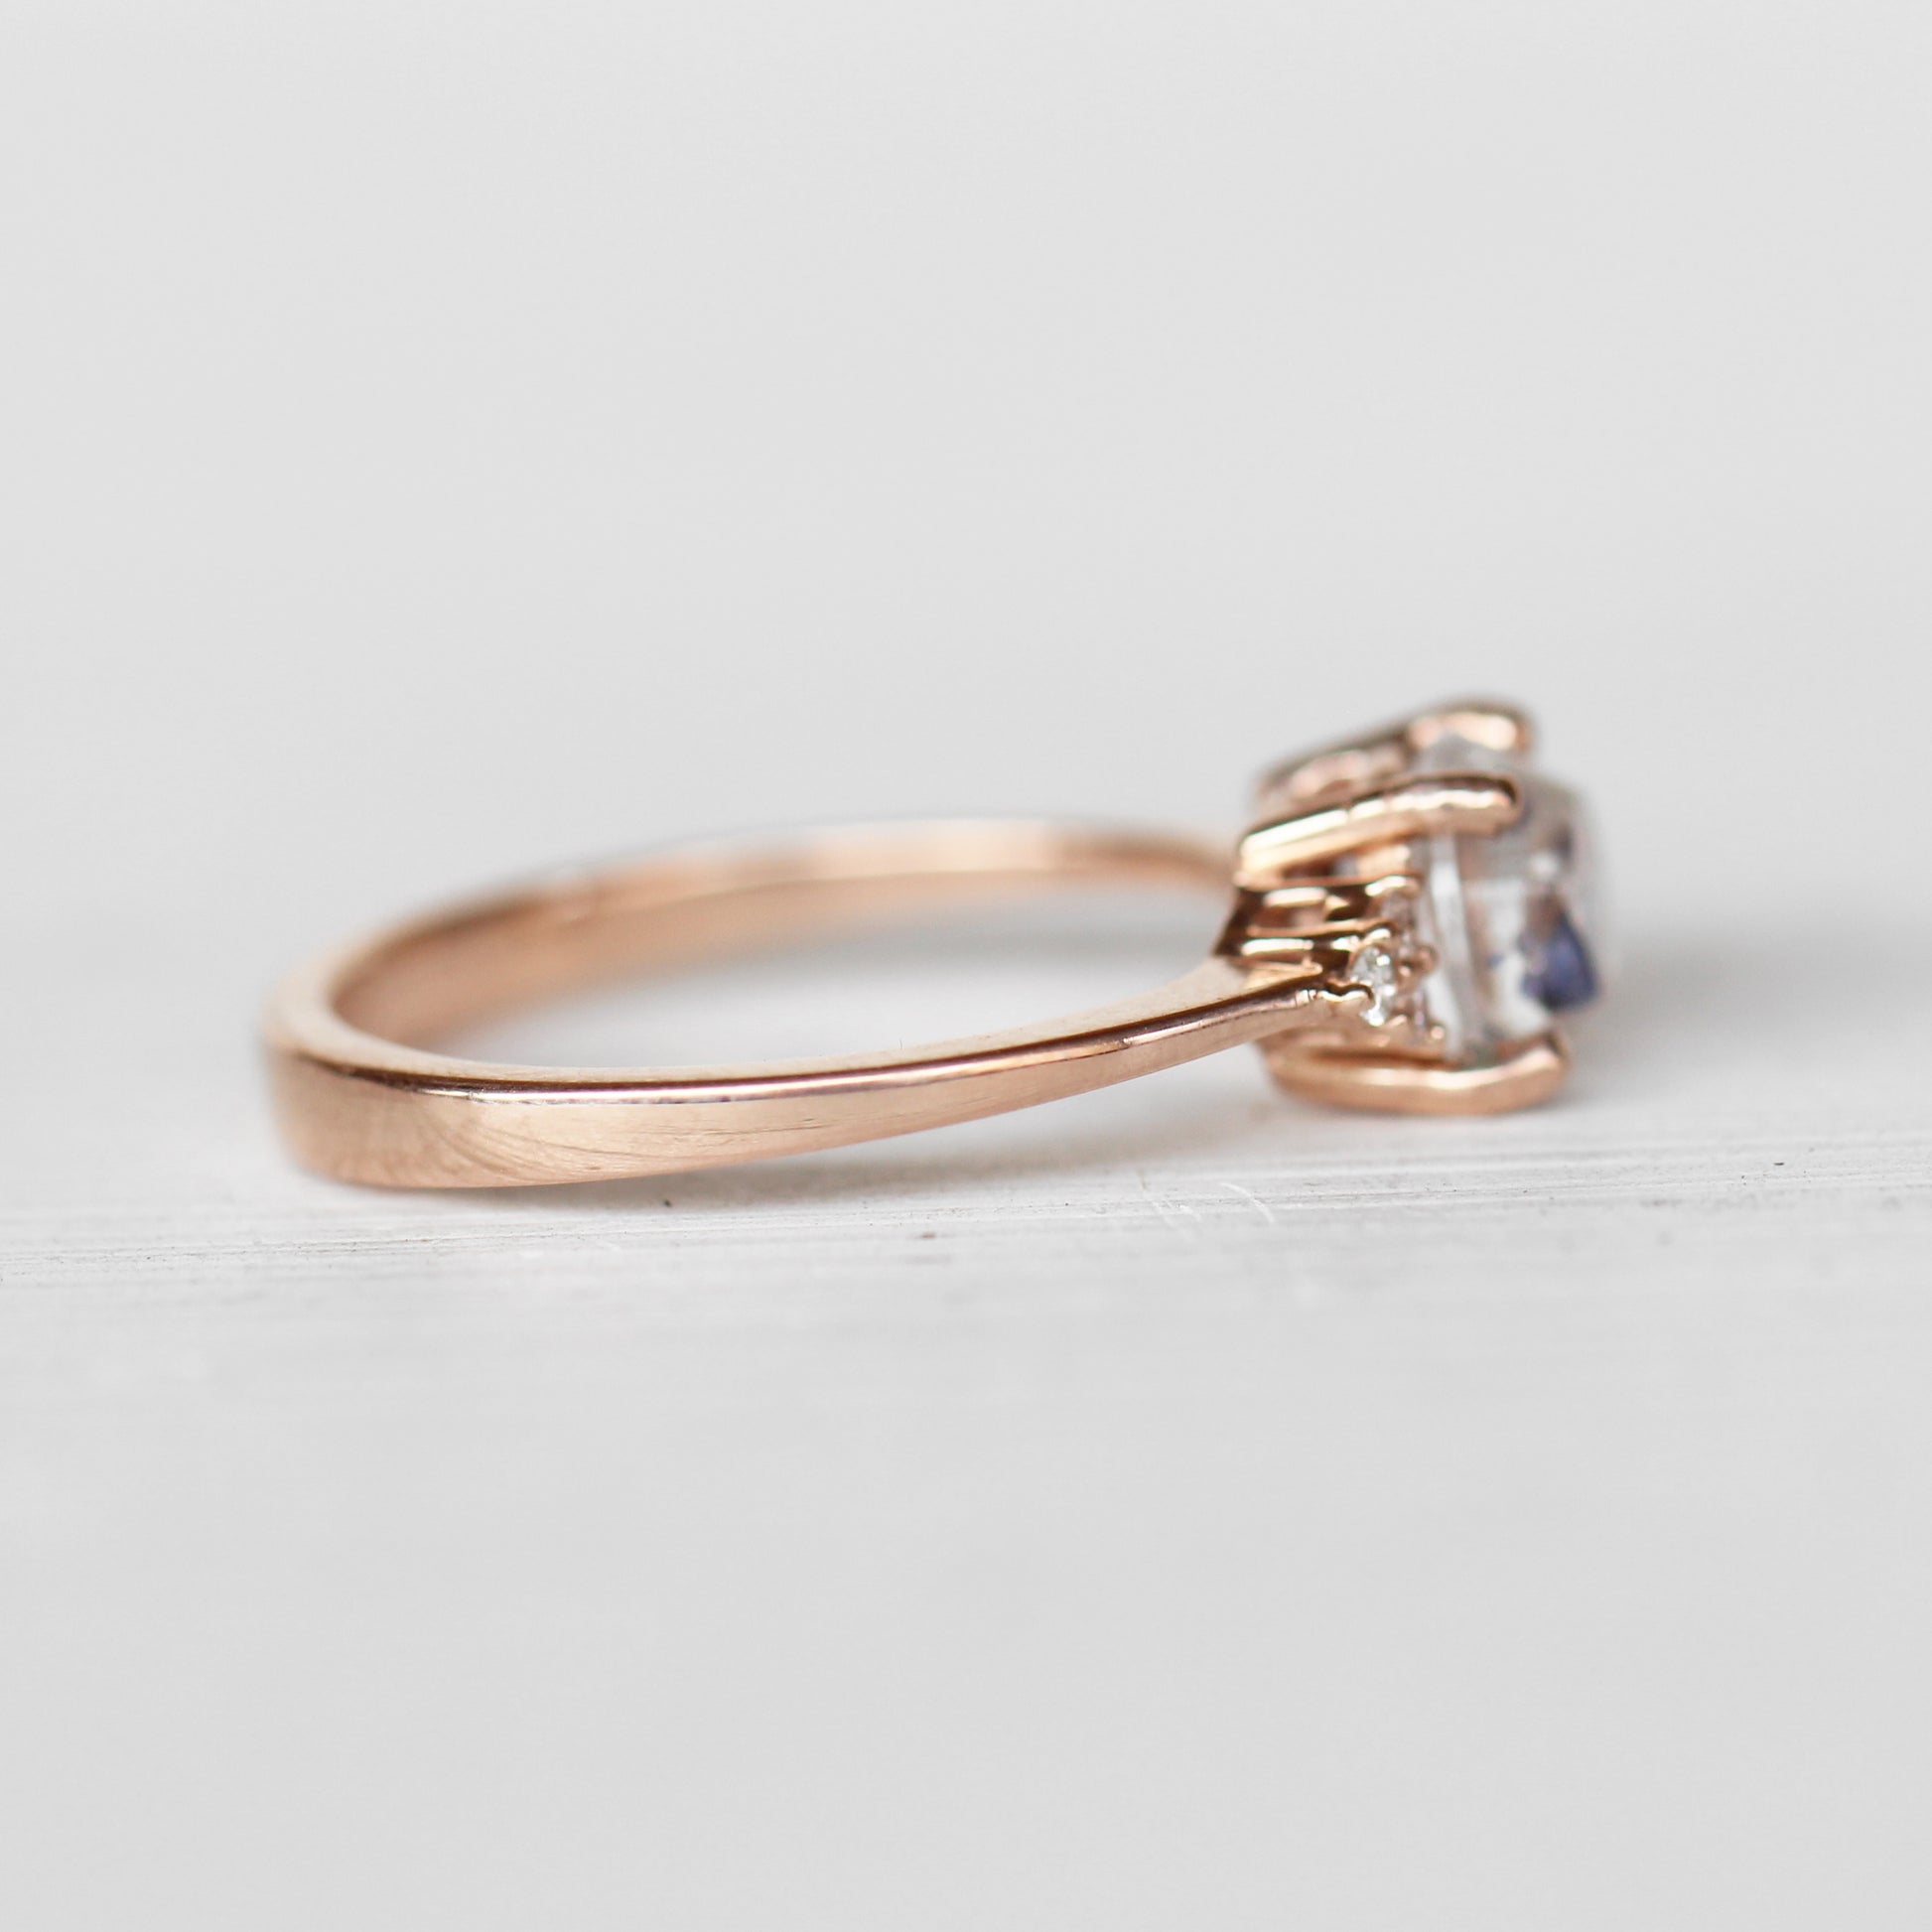 Imogene Ring with a 1.3 ct Fluorite Quartz in 14k Rose Gold - Ready to Size and Ship - Midwinter Co. Alternative Bridal Rings and Modern Fine Jewelry